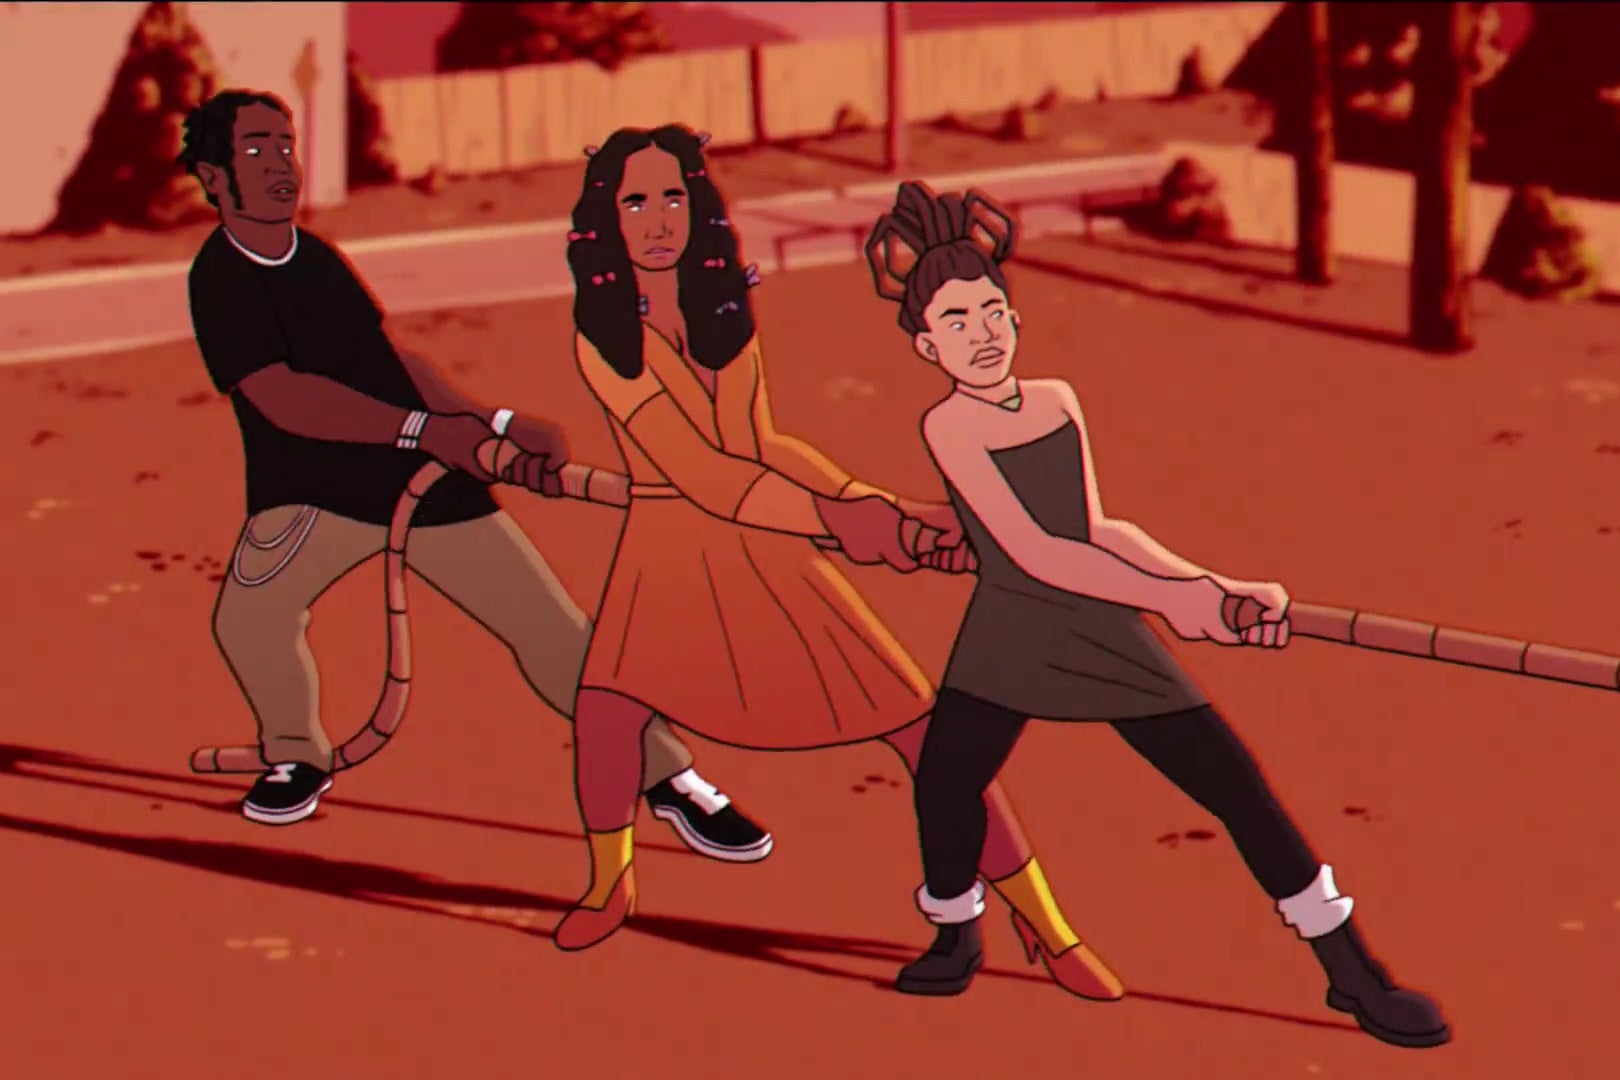 Animated versions of A$AP Rocky, Solange, and Willow Smith playing tug of war.